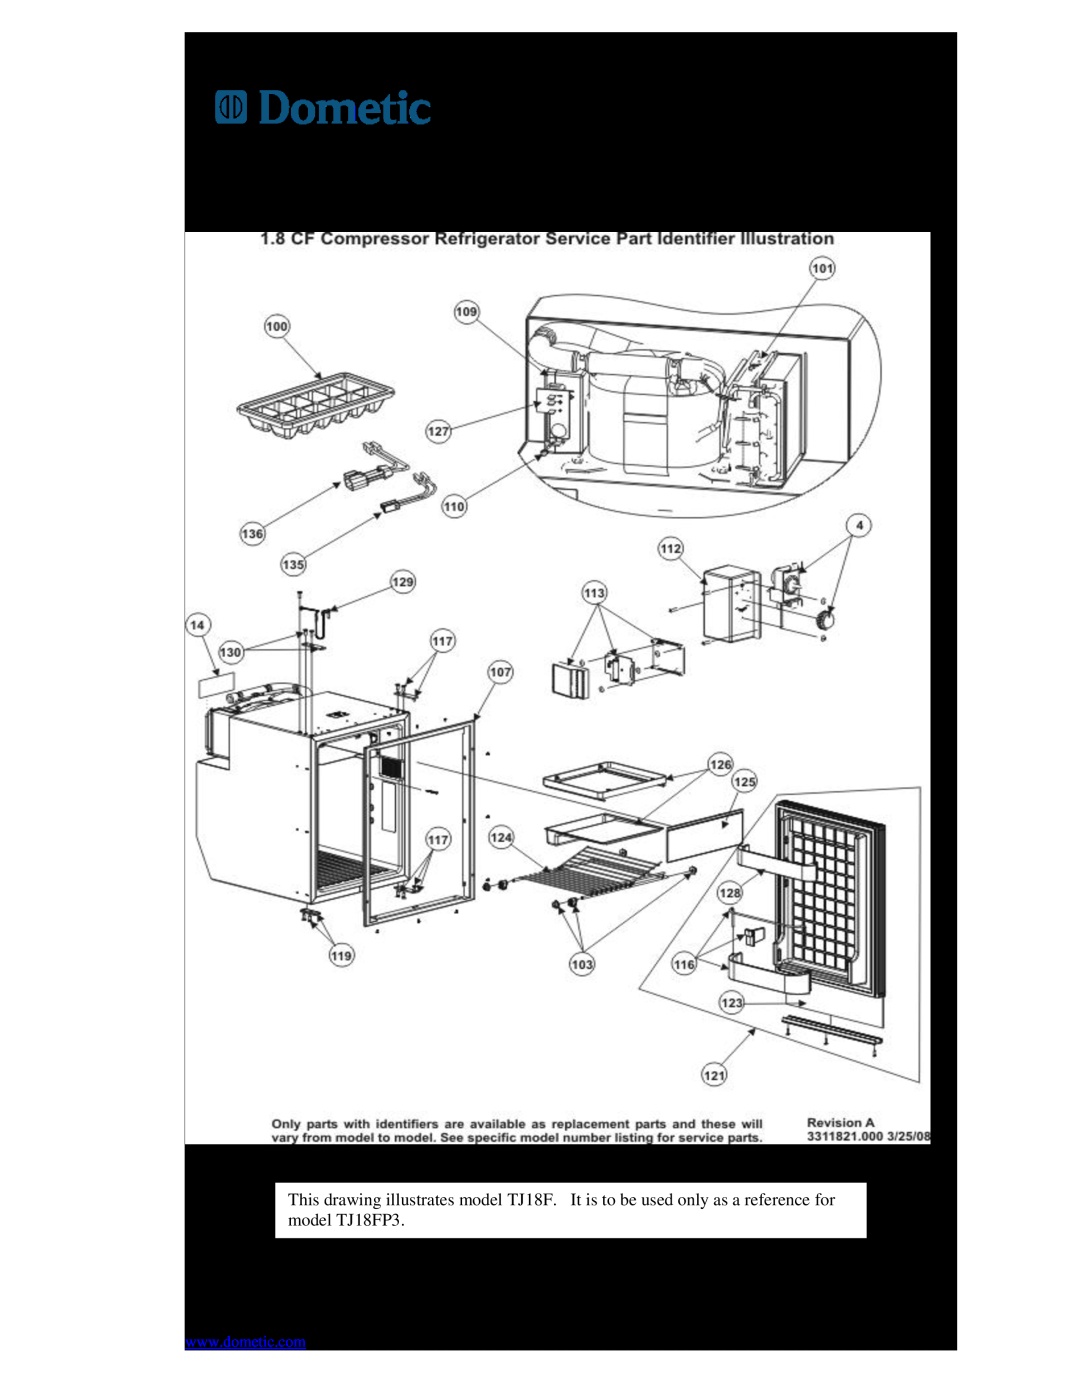 Dometic 750000026(TJ18FP3) Freightliner Refrigerator Troubleshooting Guide, Dometic Corporation, Environmental Division 